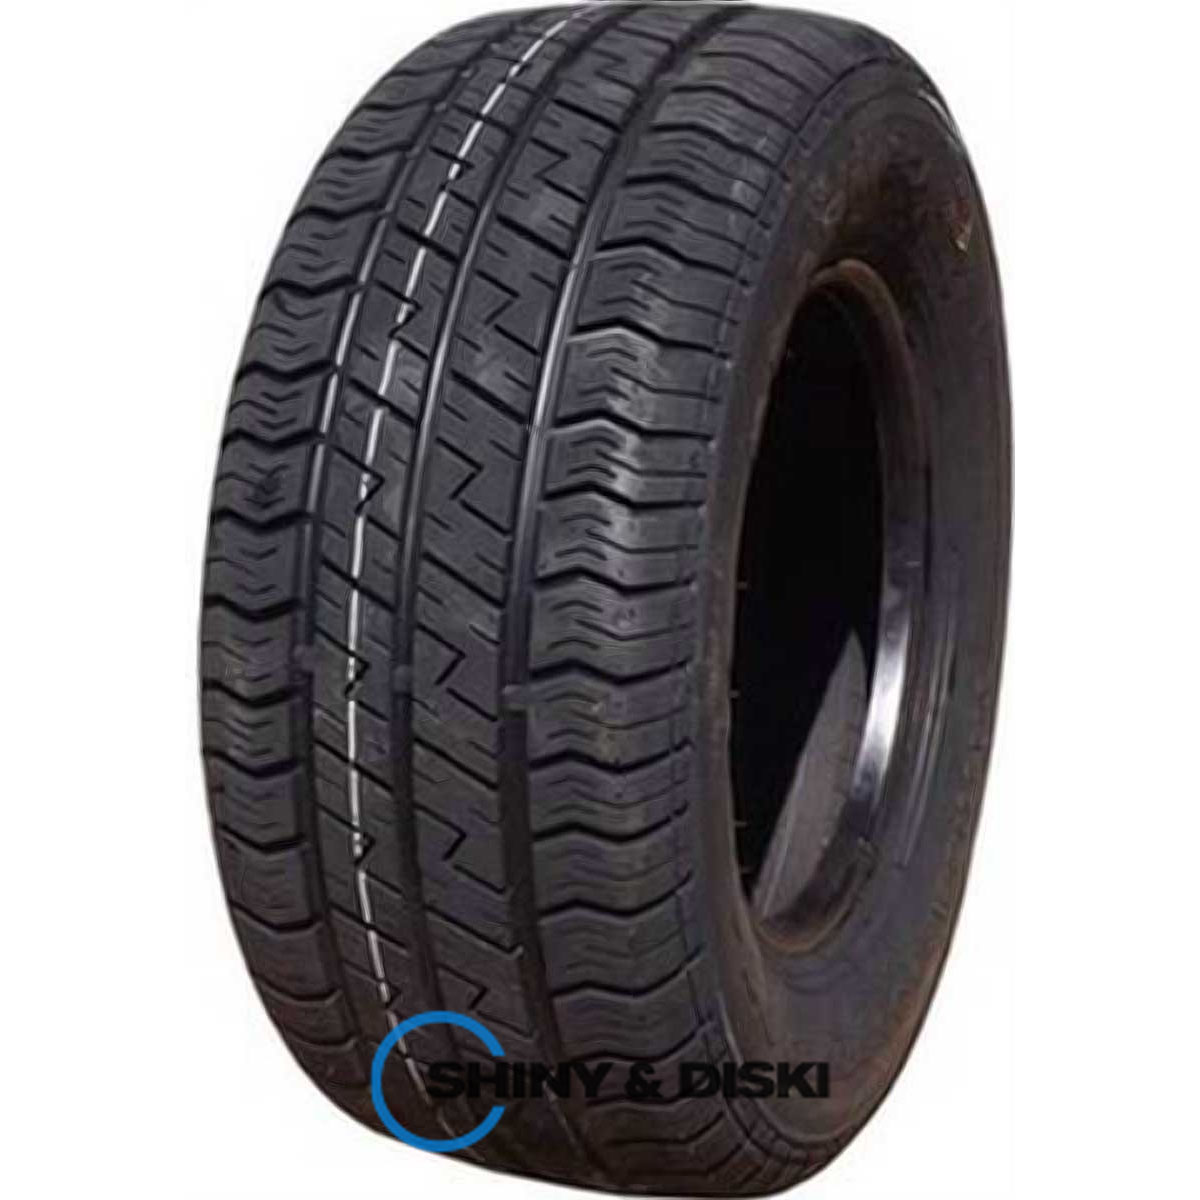 compass ct7000 195/60 r12c 104n